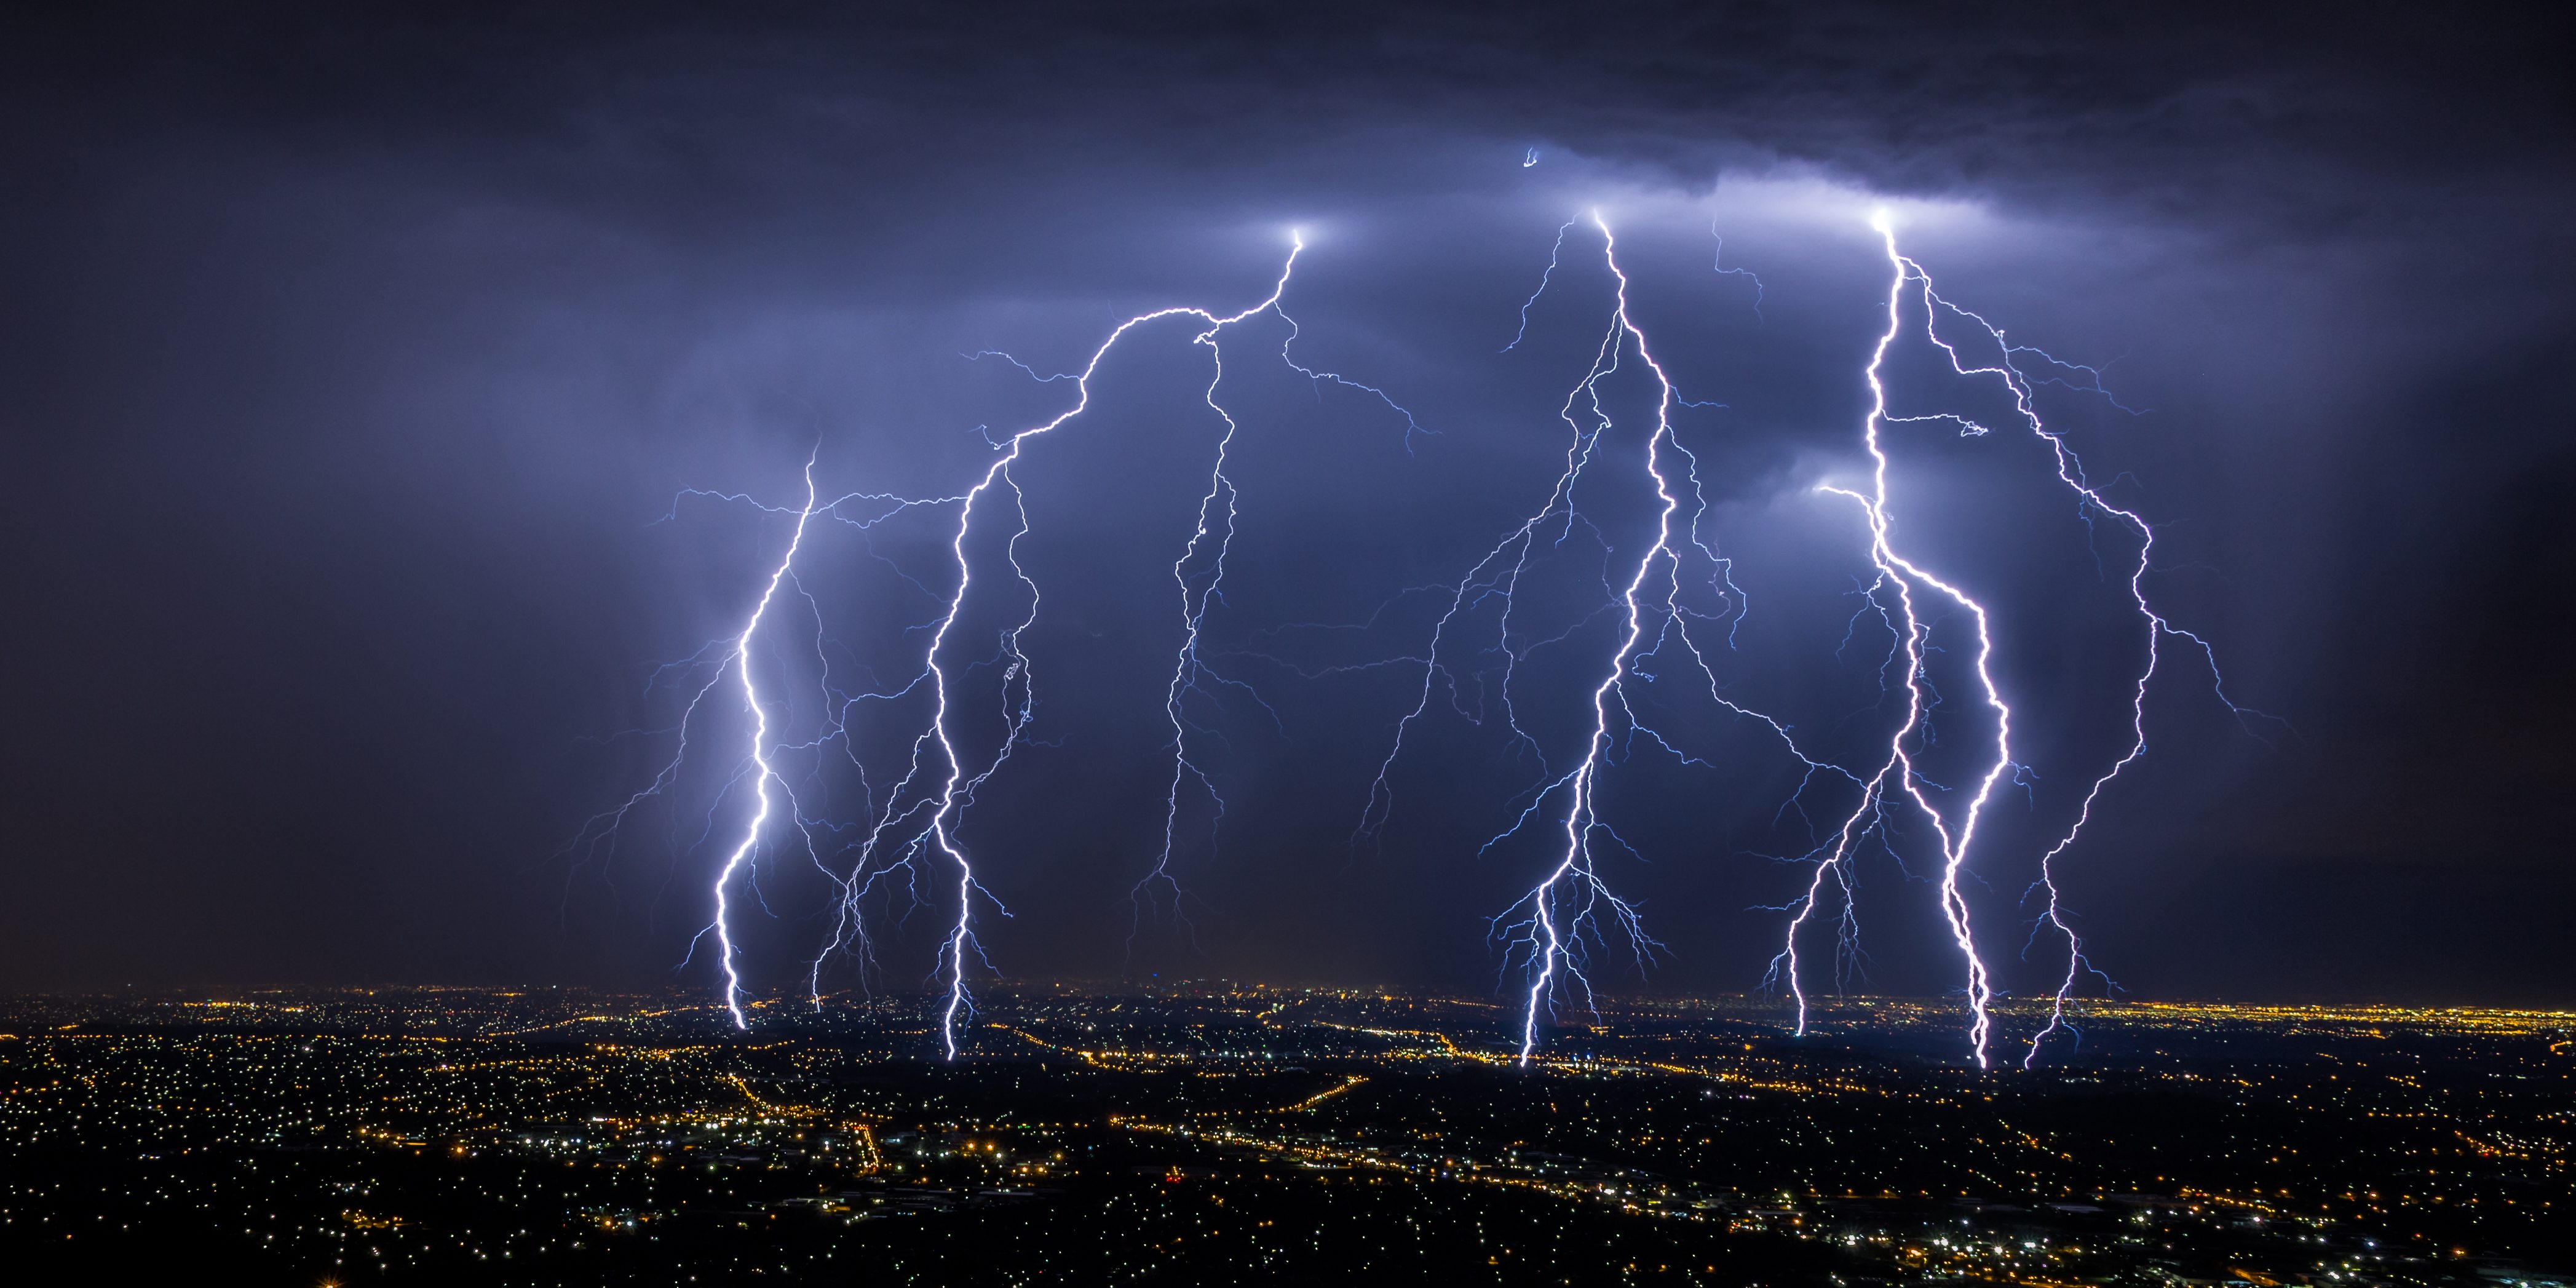 Lightning strikes over a city at night, illustrating the sudden and dangerous nature of so-called cytokine storms, potentially fatal episodes where inflammation-causing proteins flood the blood.